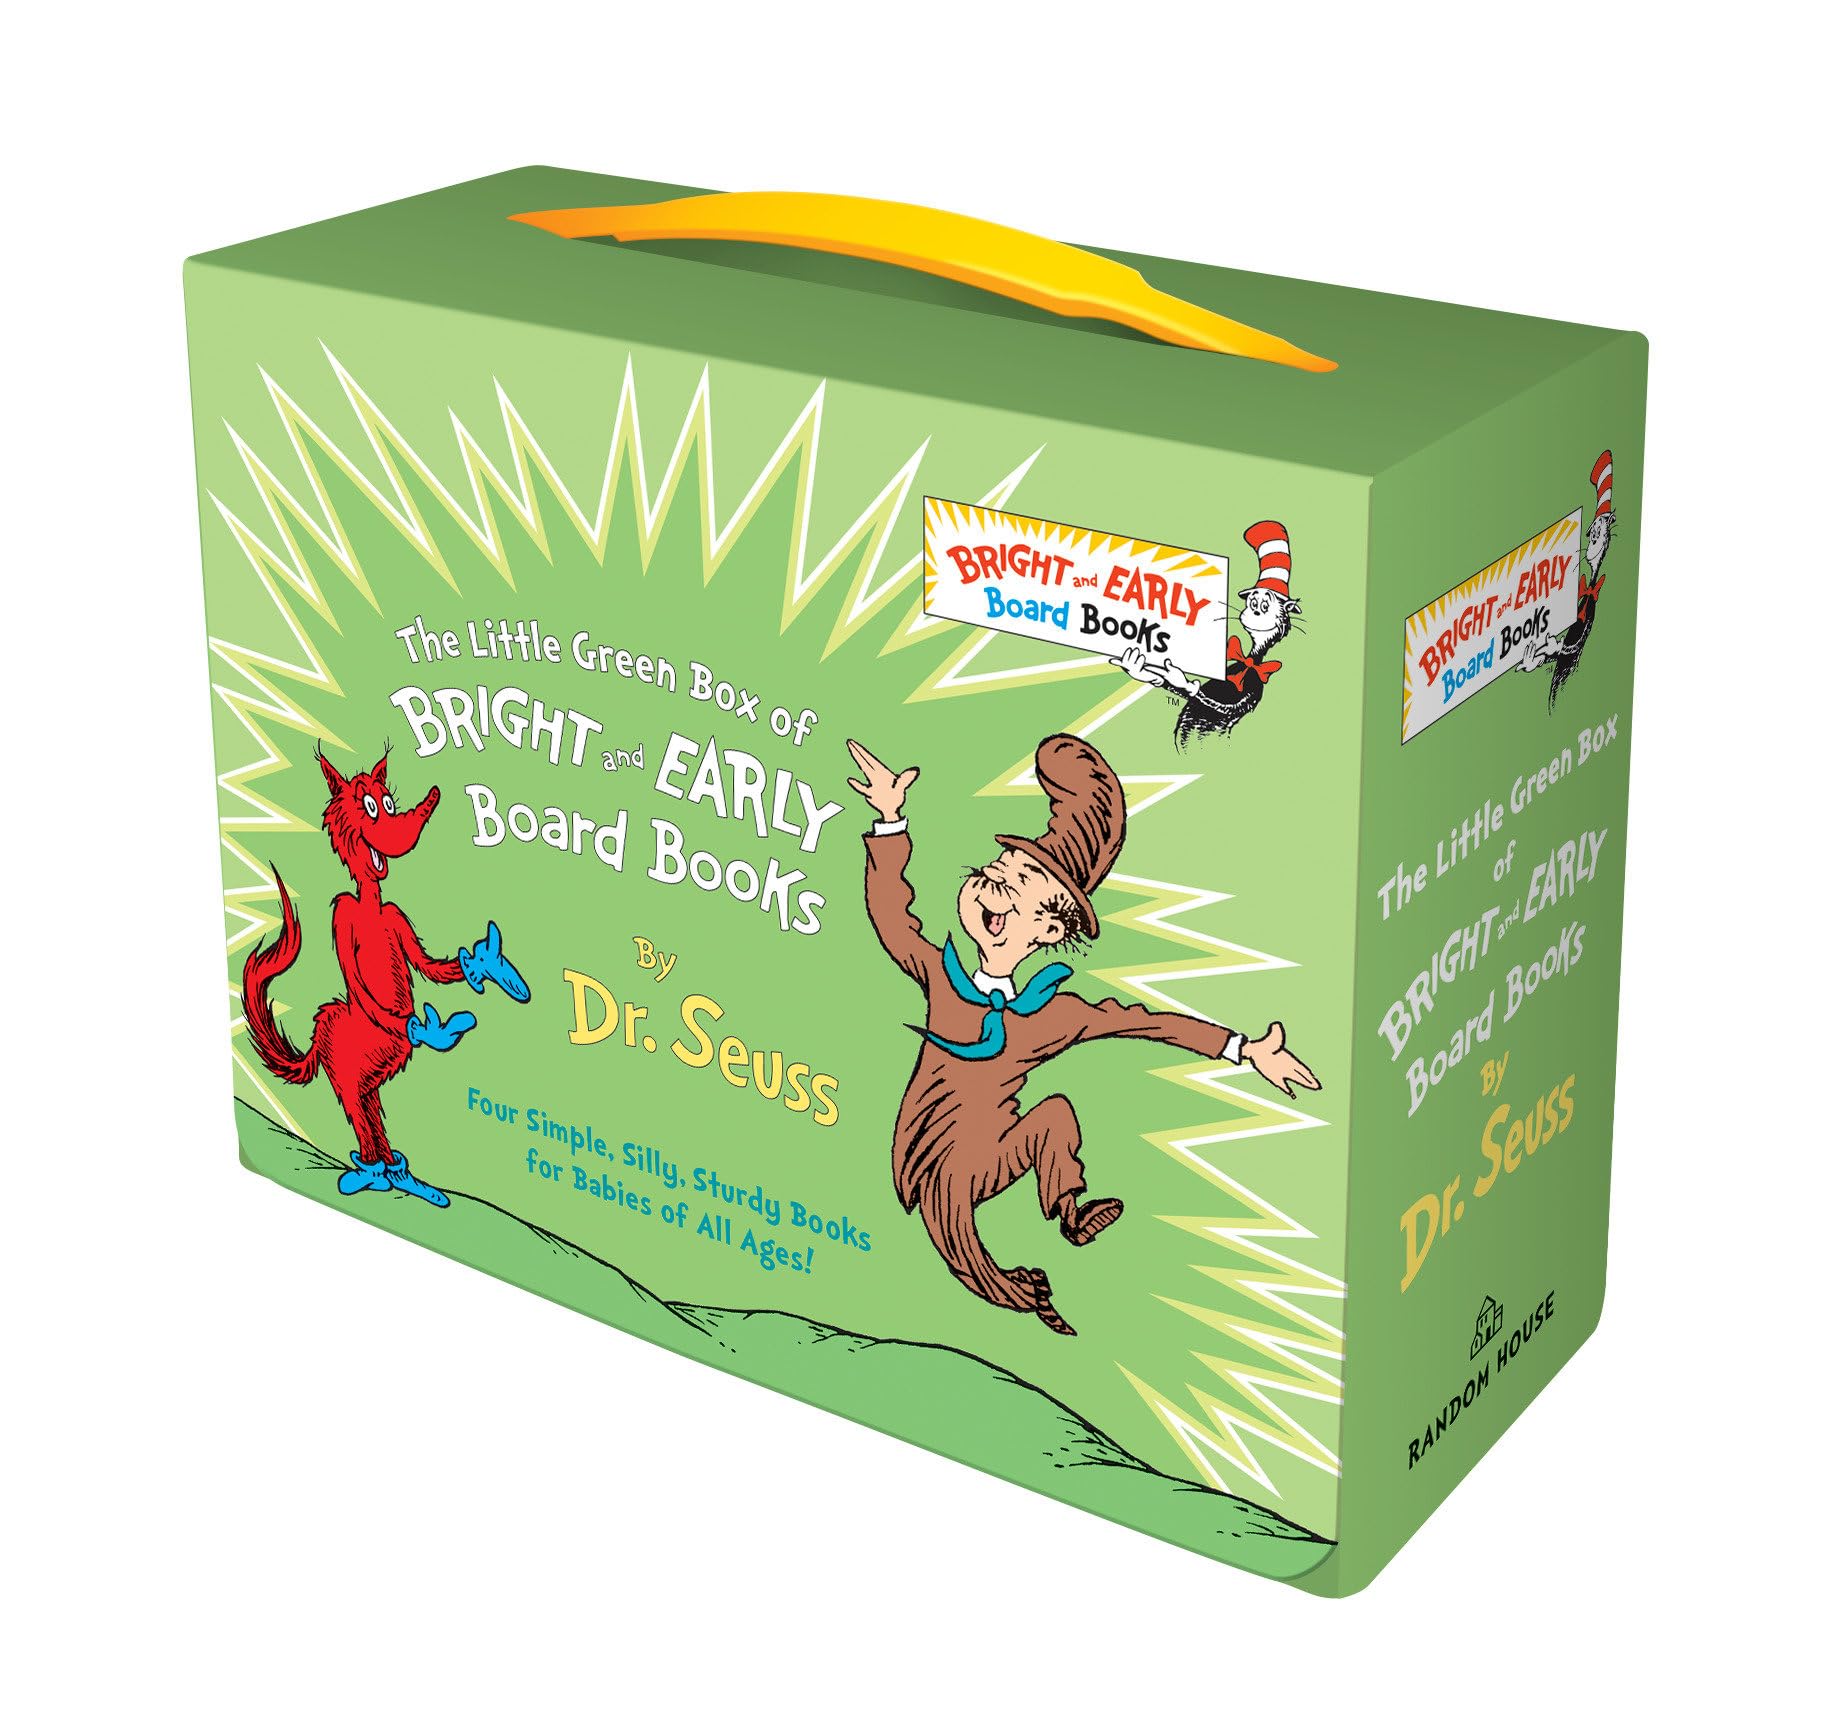 Little Green Box of Bright and Early Board Books: Fox in Socks; Mr. Brown Can Moo! Can You?; There's a Wocket in My Pocket!; Dr. Seuss's ABC by Dr Seuss